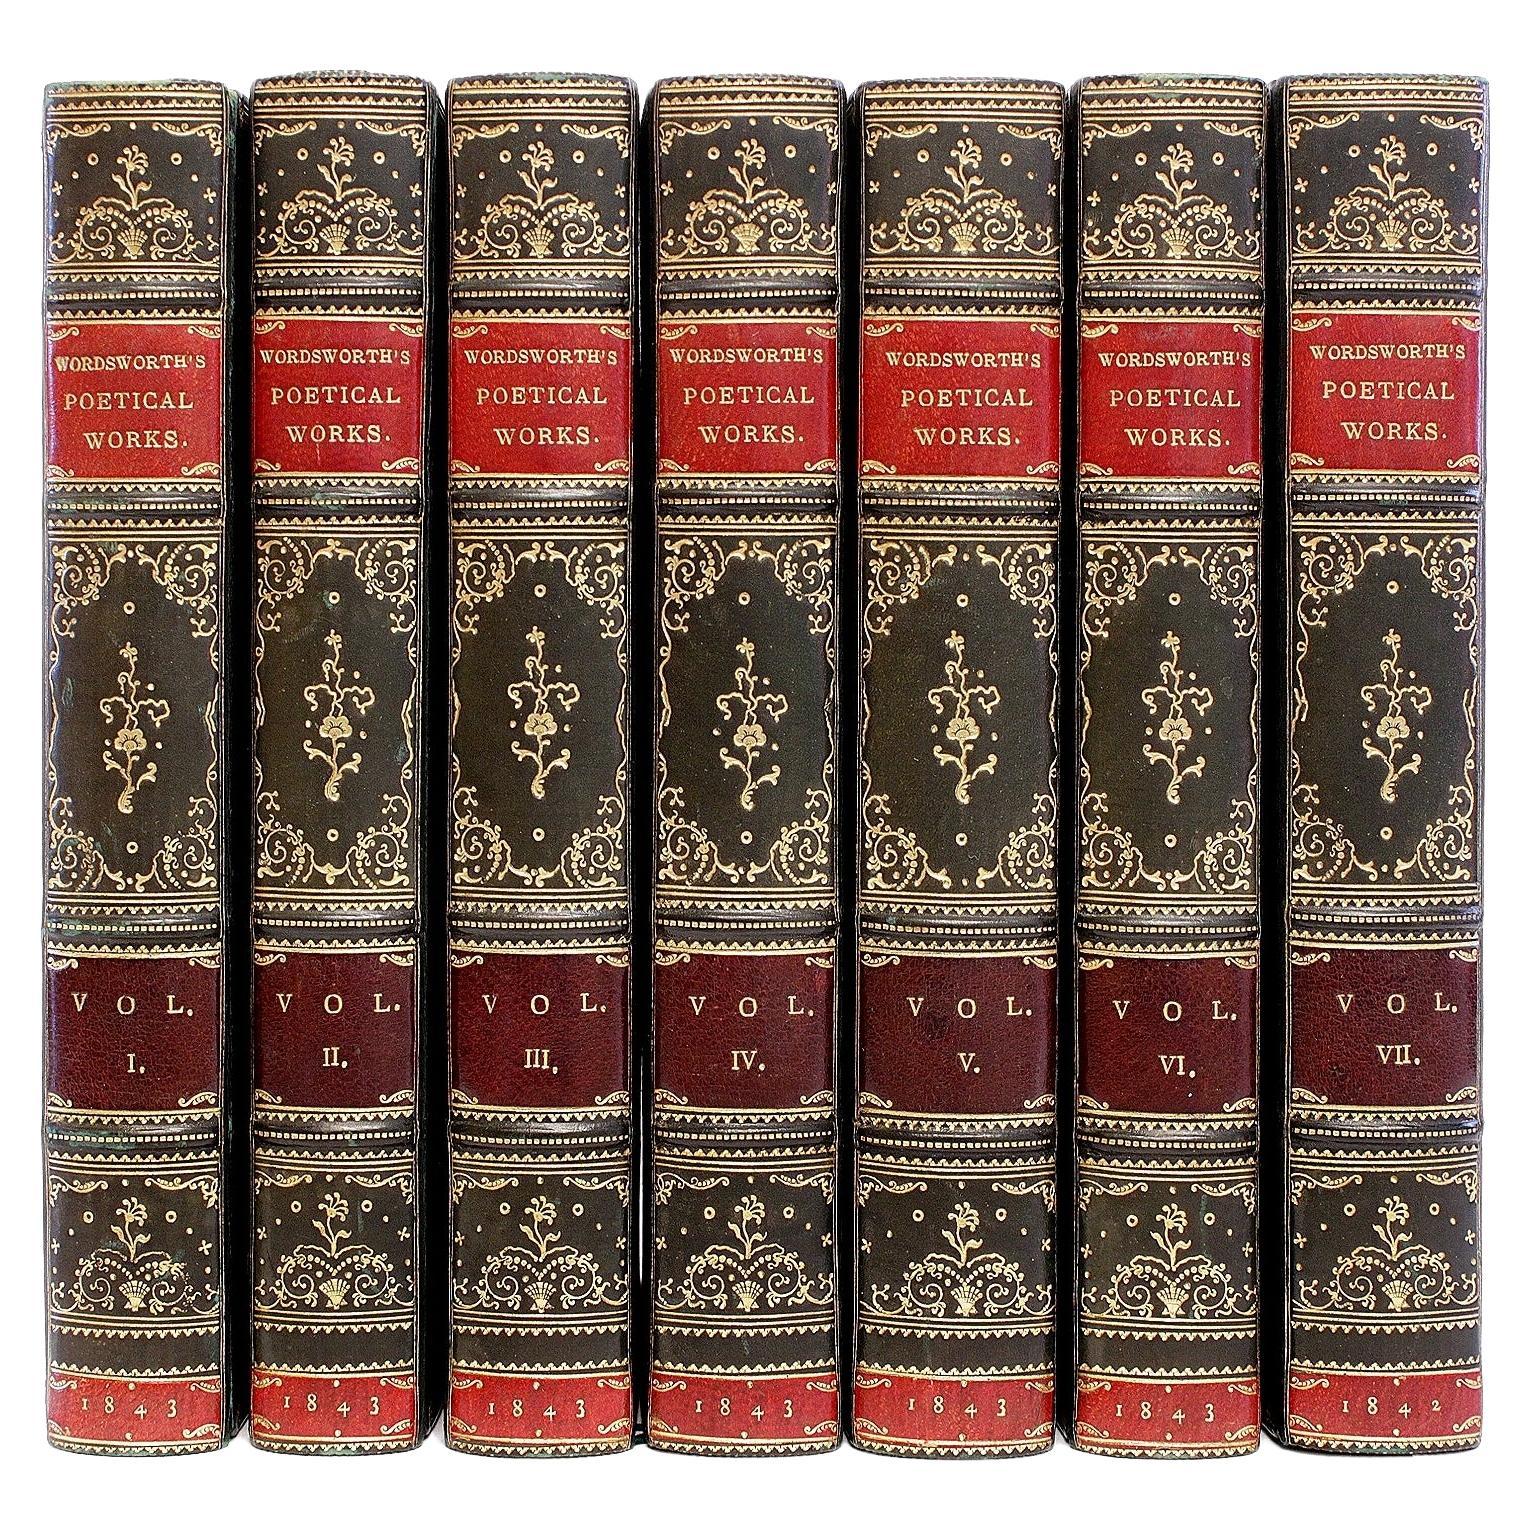 Poetical Works of William Wordsworth - 7 vols. - IN A FINE FULL LEATHER BINDING